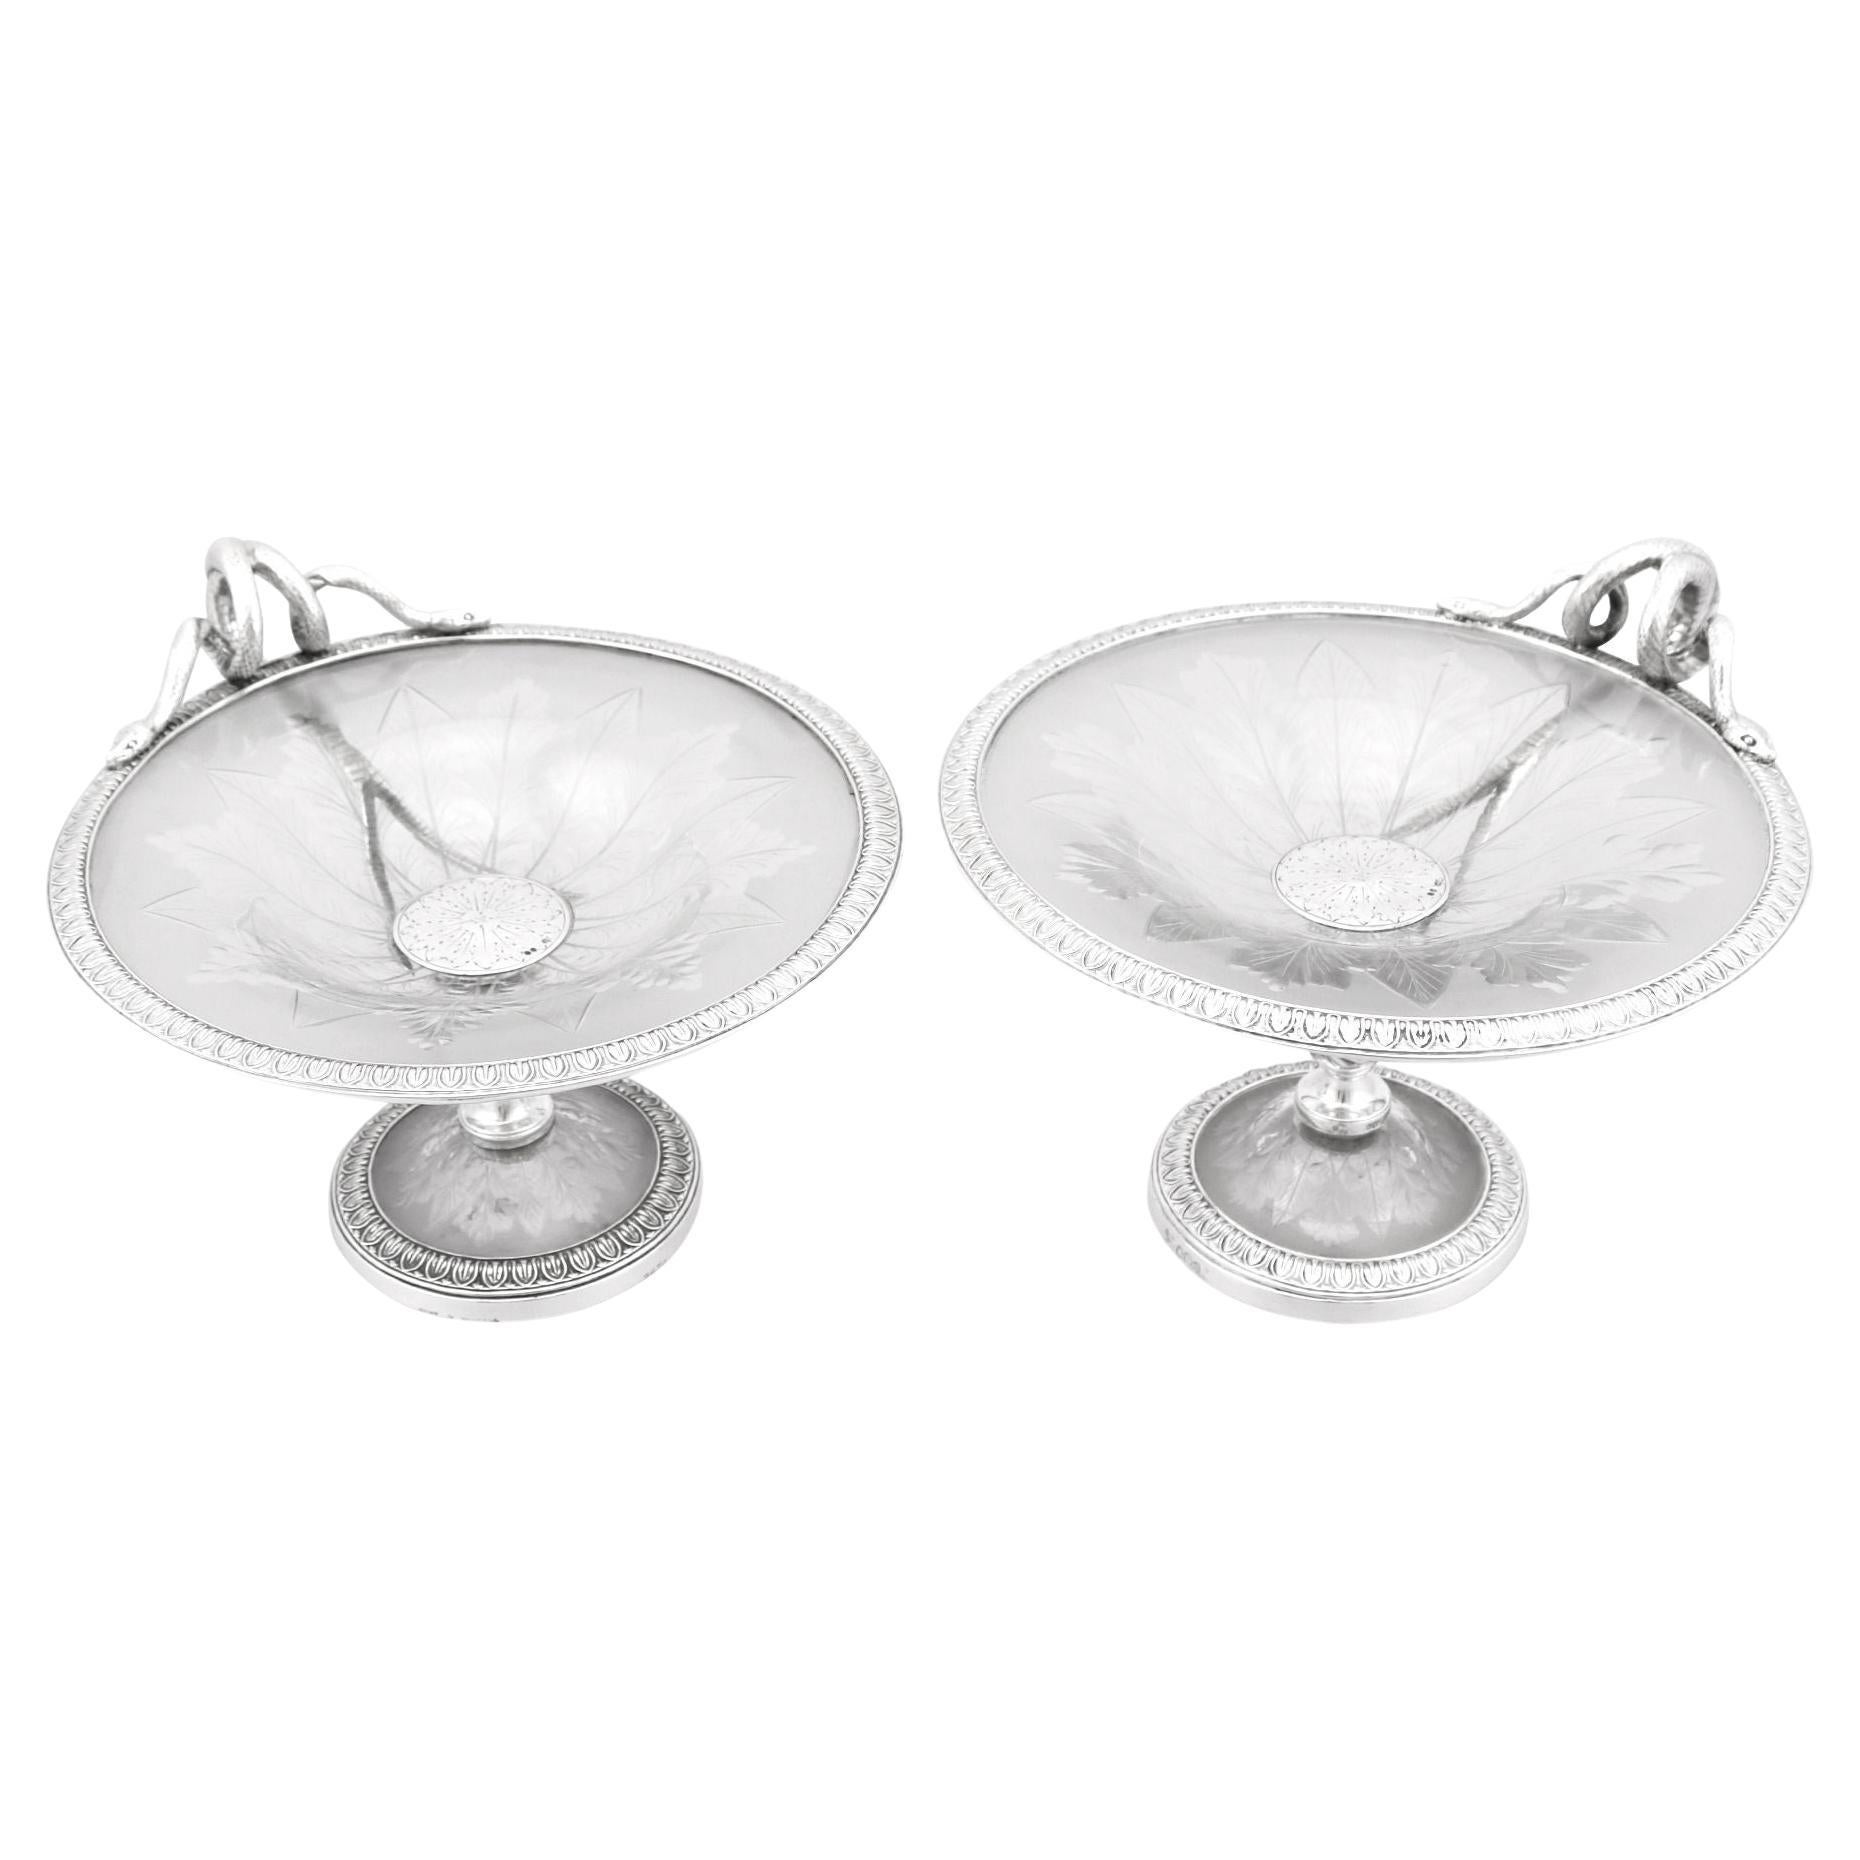 Antique Victorian Sterling Silver and Glass Tazzas/Centrepieces For Sale